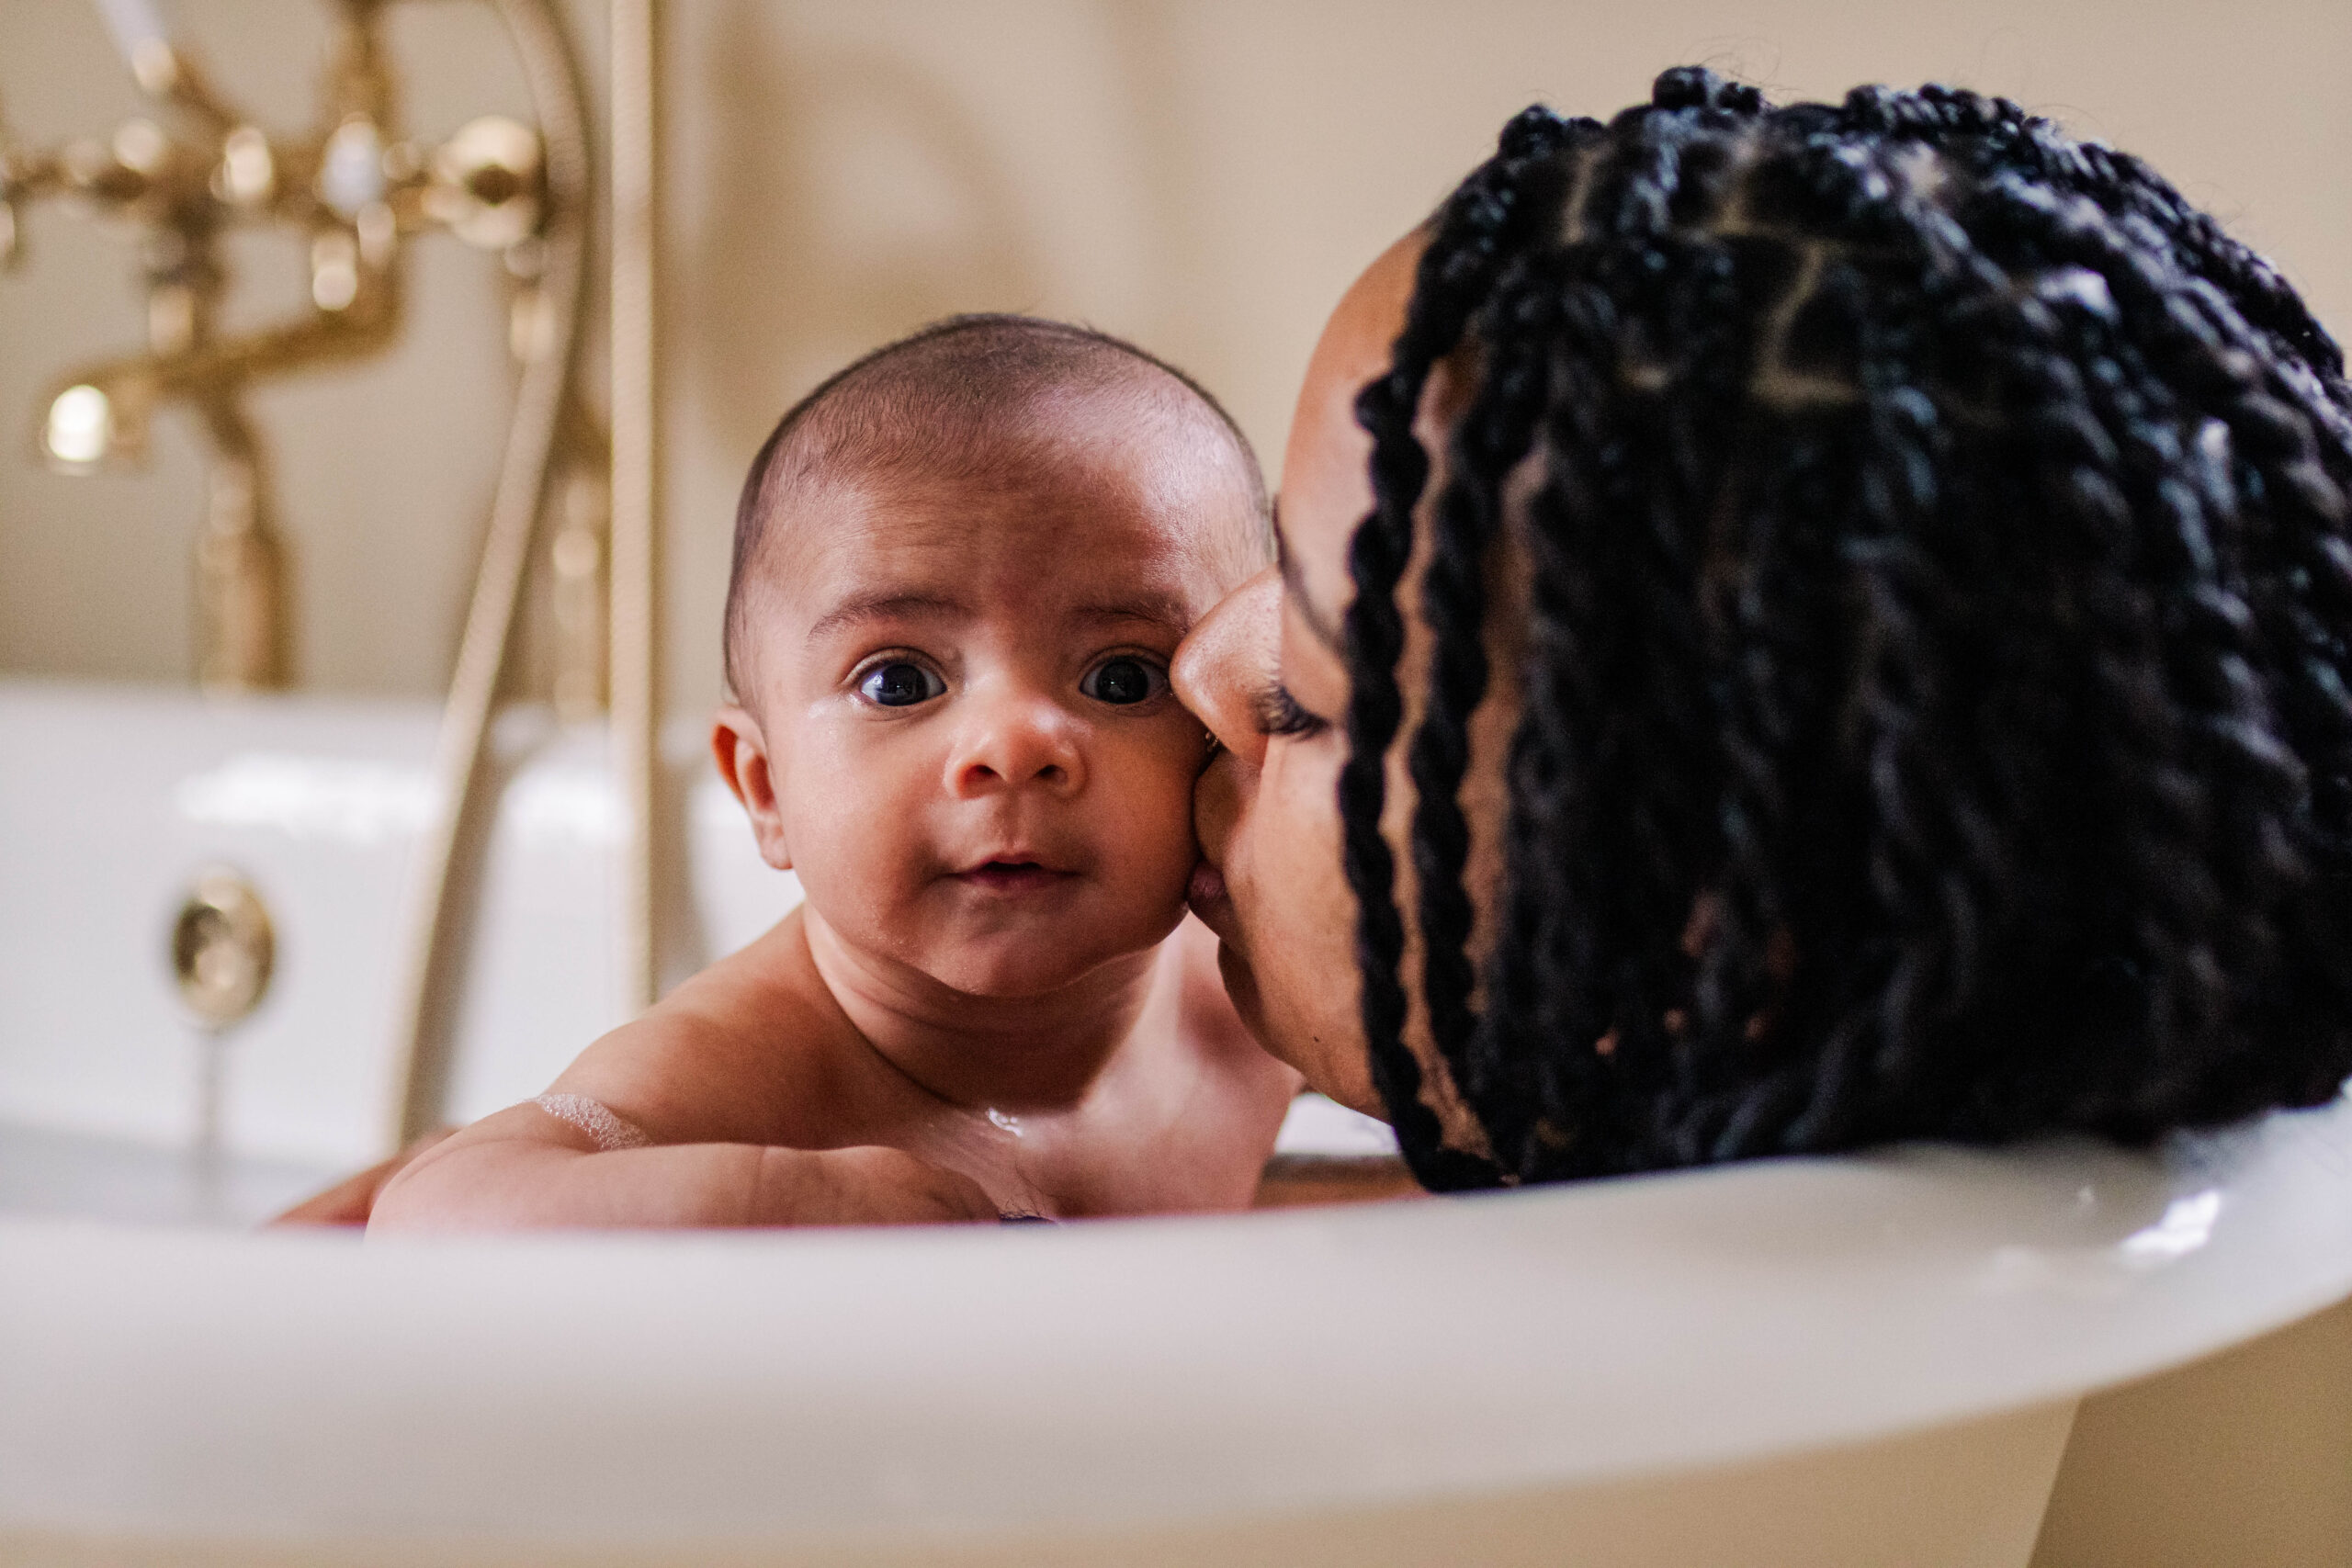 Mother kisses baby on the cheek as they bath together